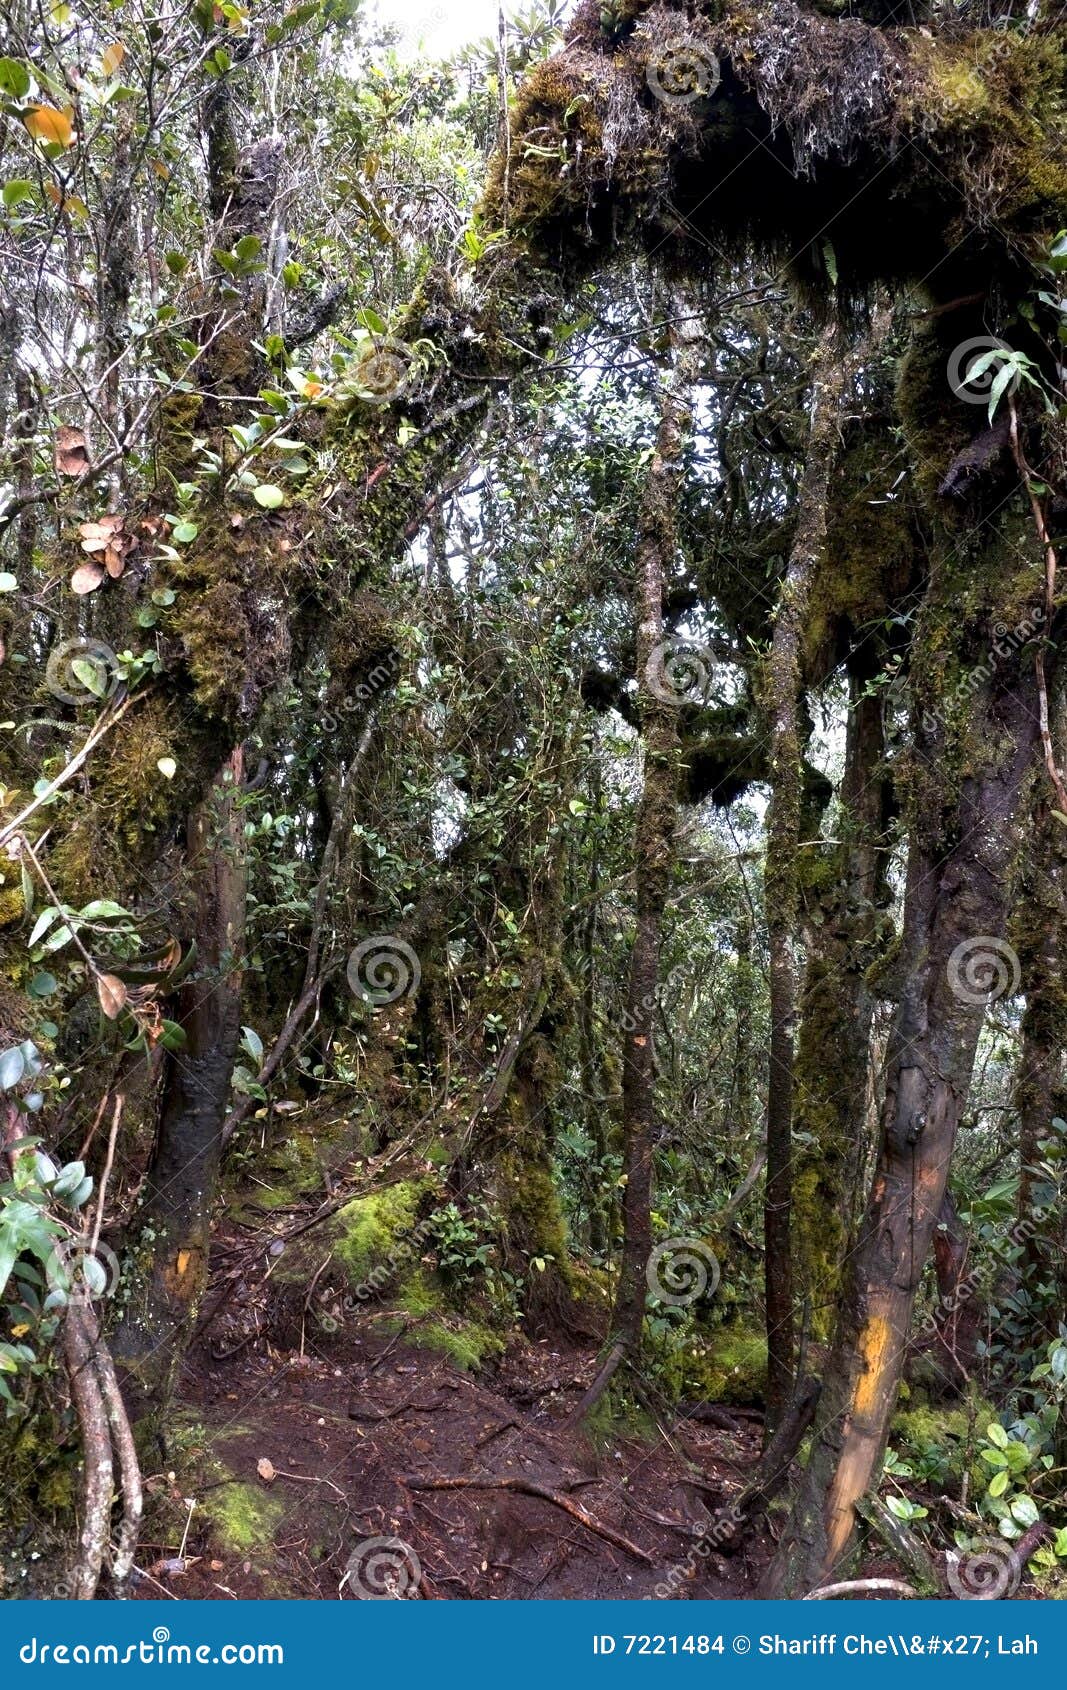 world's oldest mossy forest